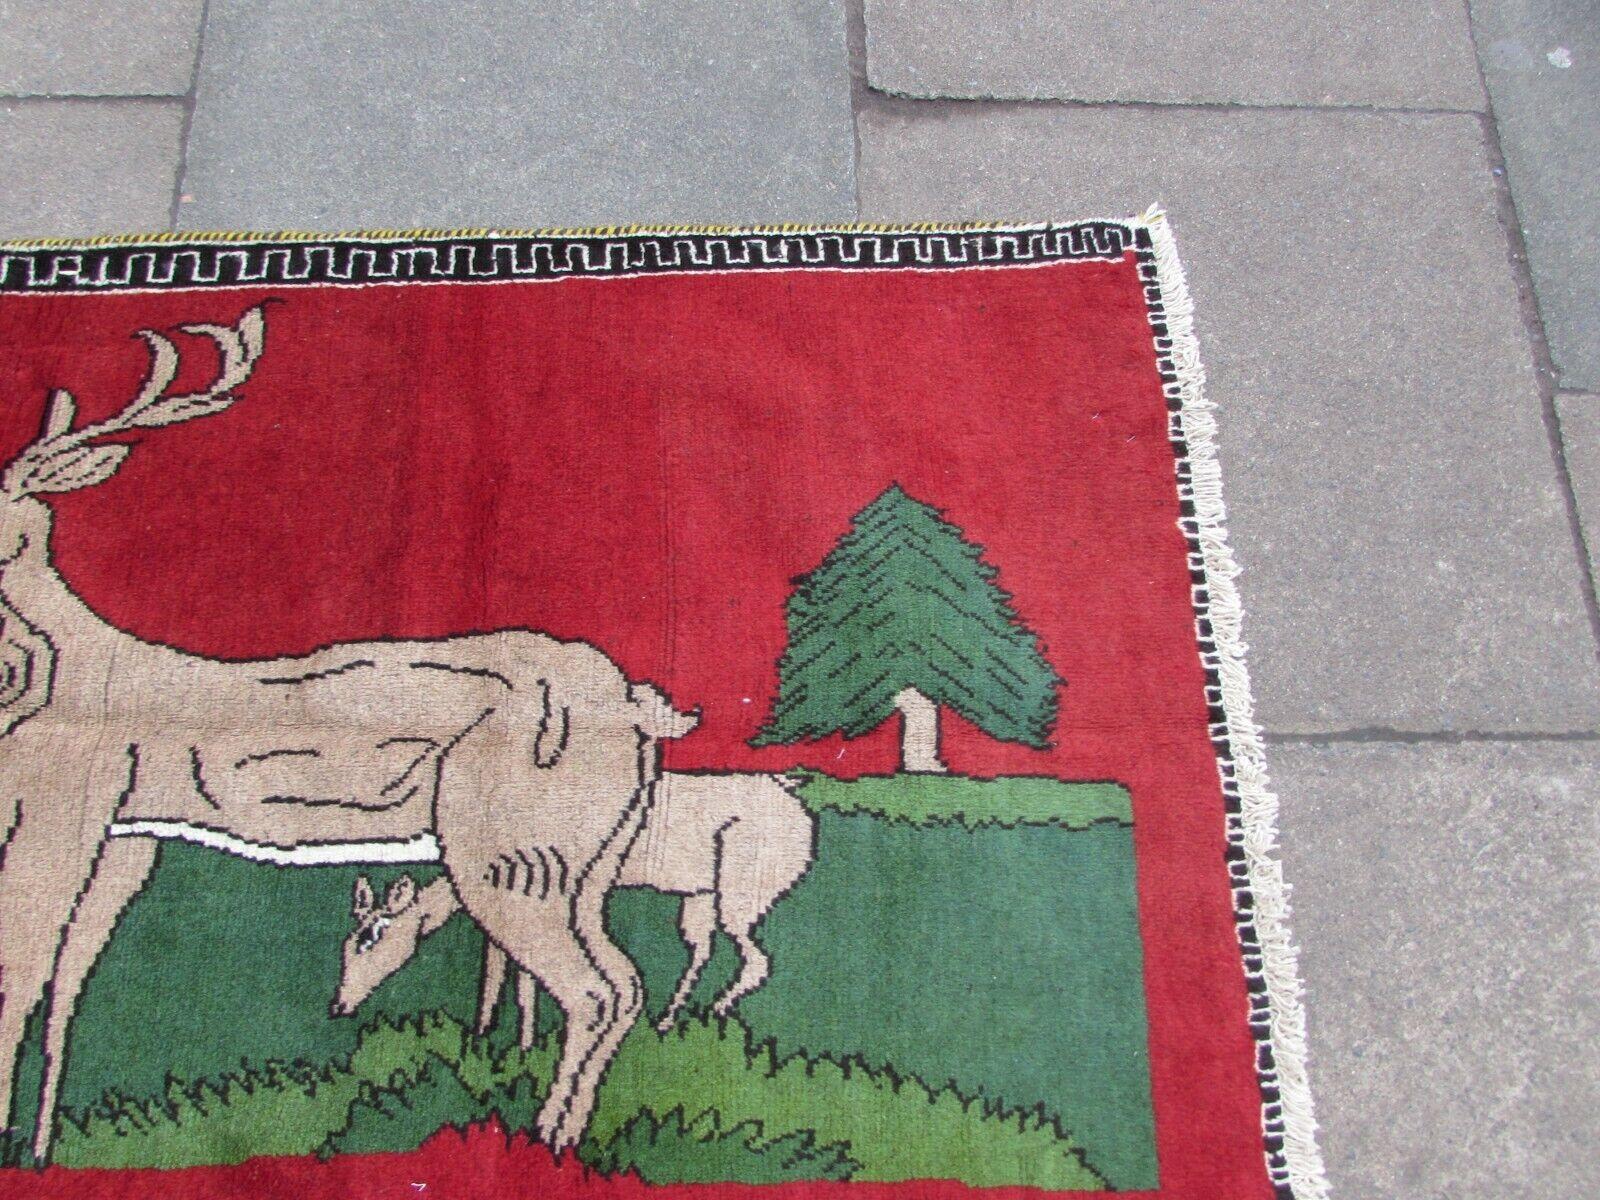 Late 20th Century Handmade Vintage Persian Style Gabbeh Rug With Deer 2.6' x 4', 1970s - 1Q71 For Sale